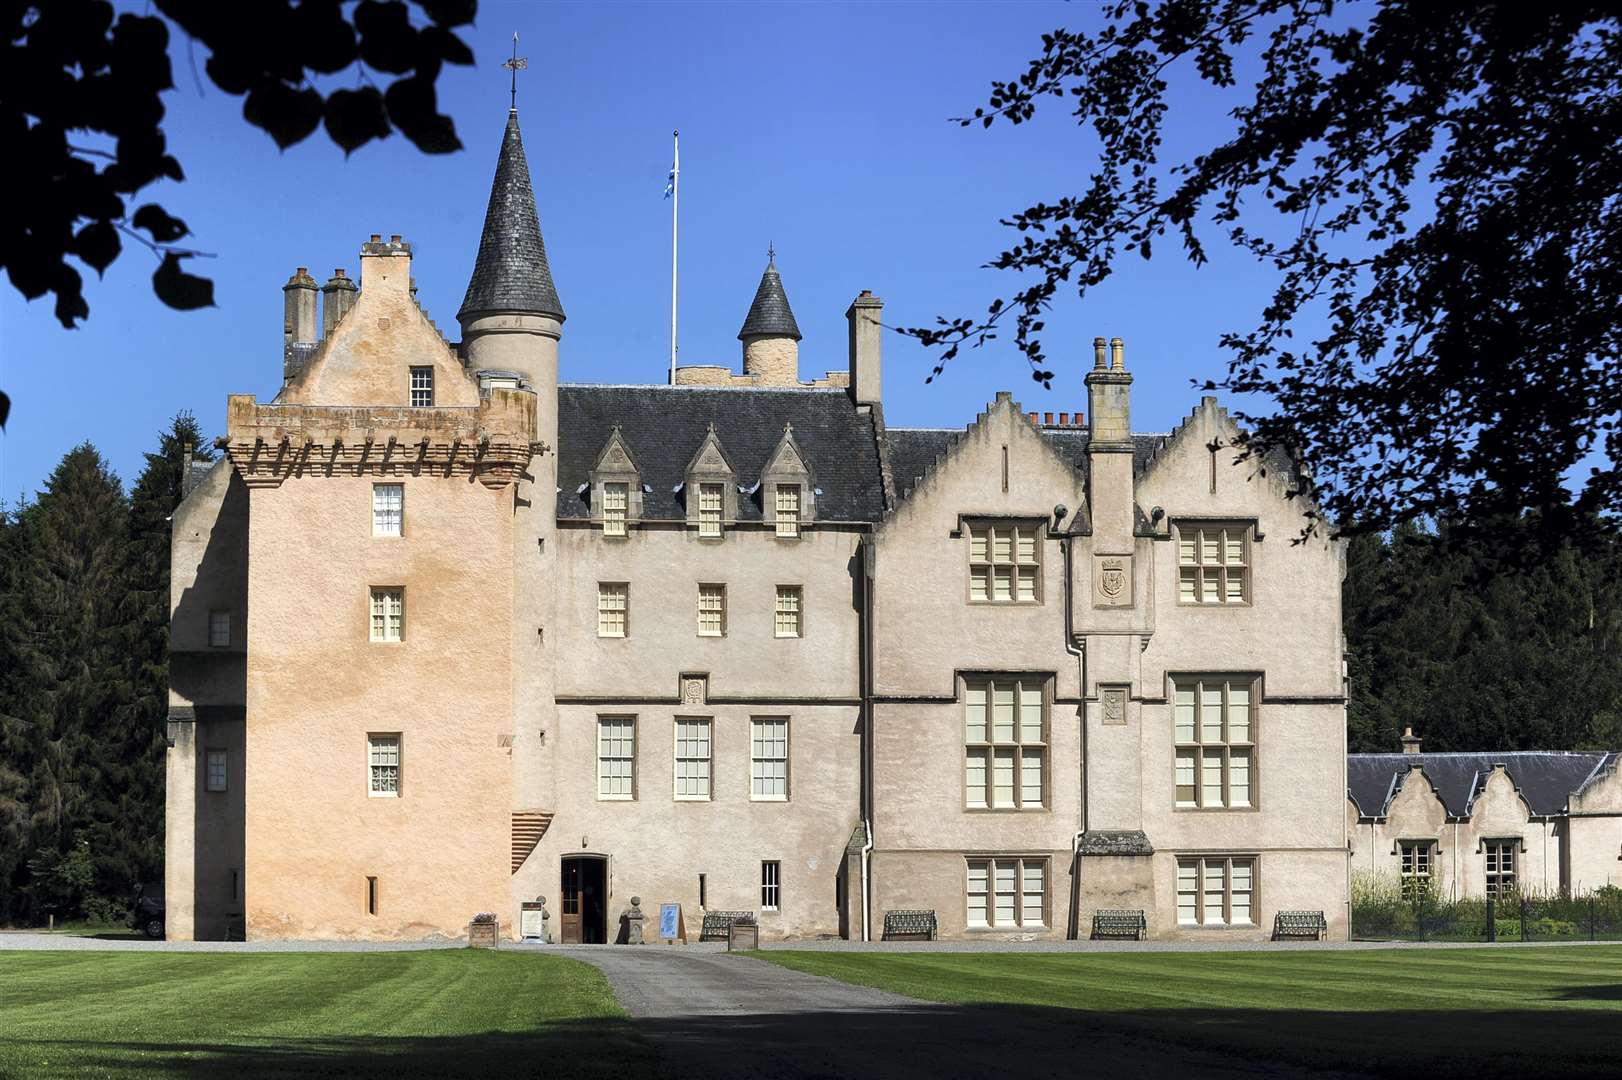 The rally will return to Brodie Castle for the first time since 2019.